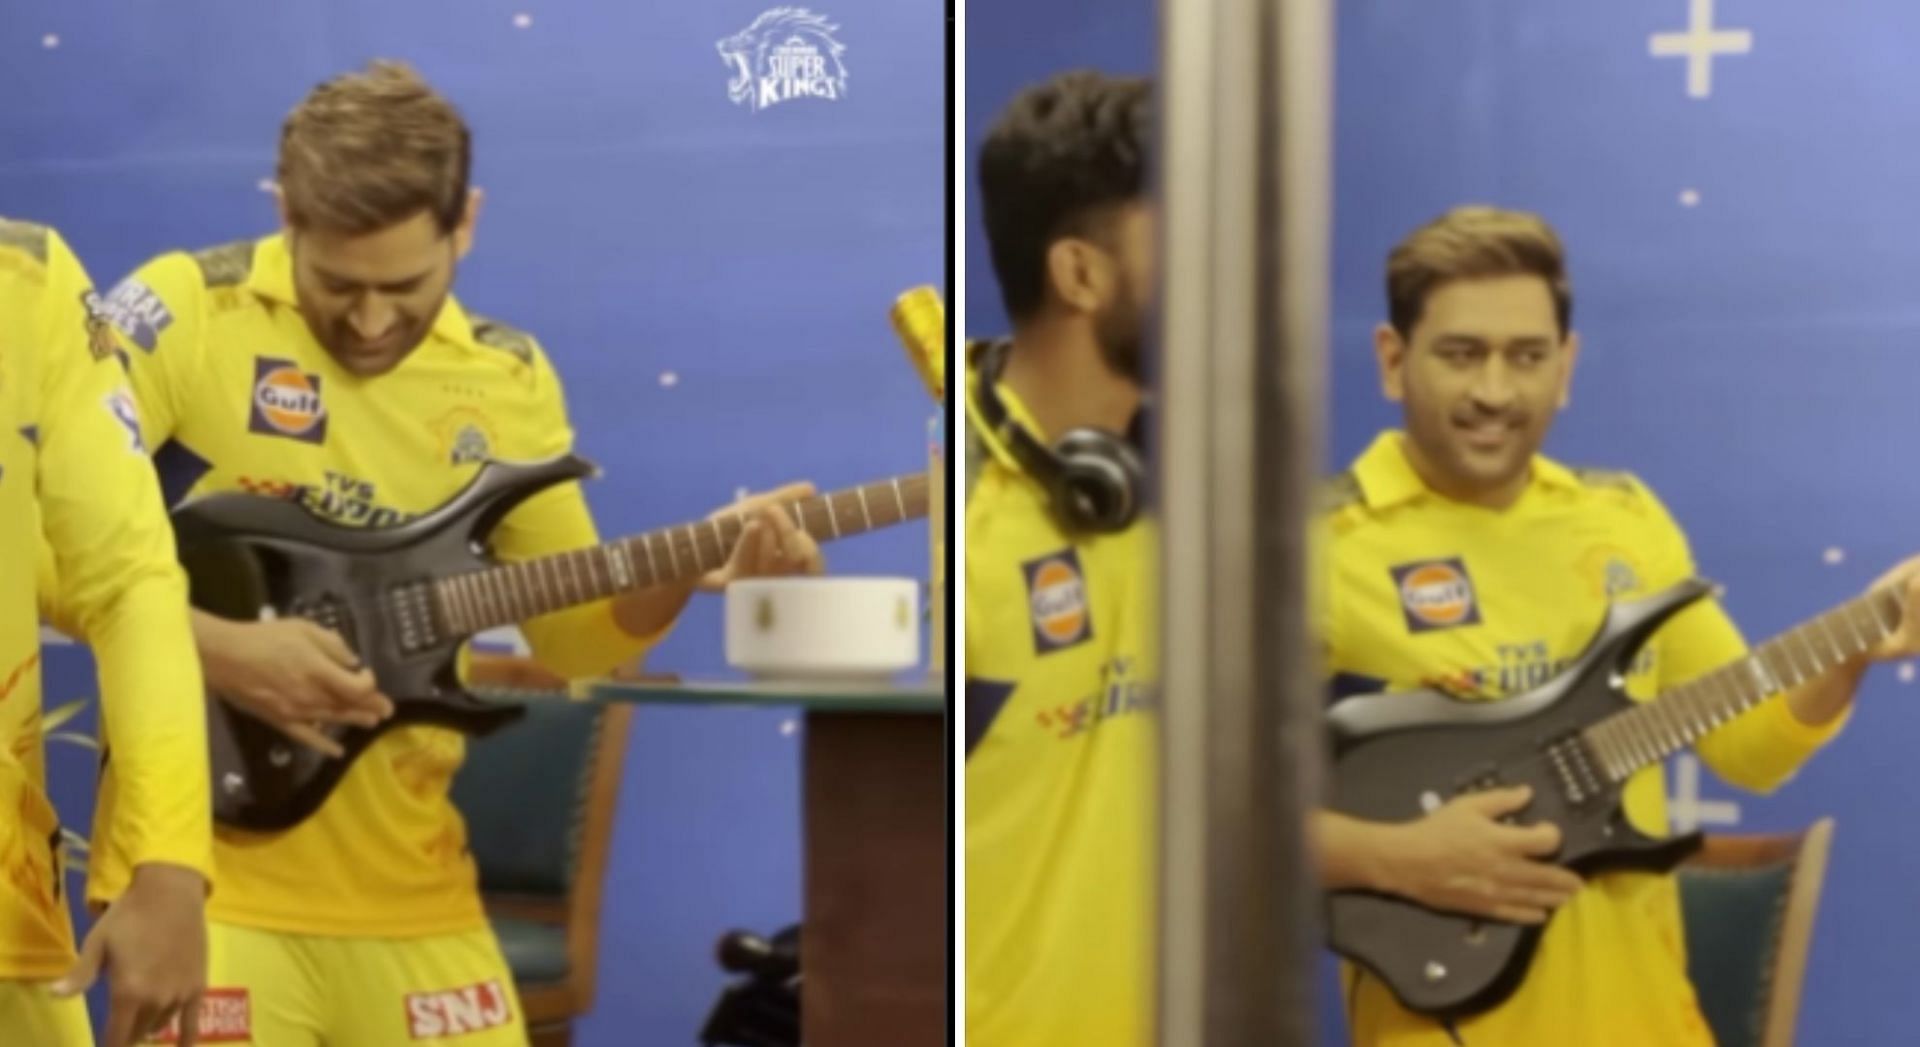 MS Dhoni recently turned guitarist for an ad (Image: Instagram)